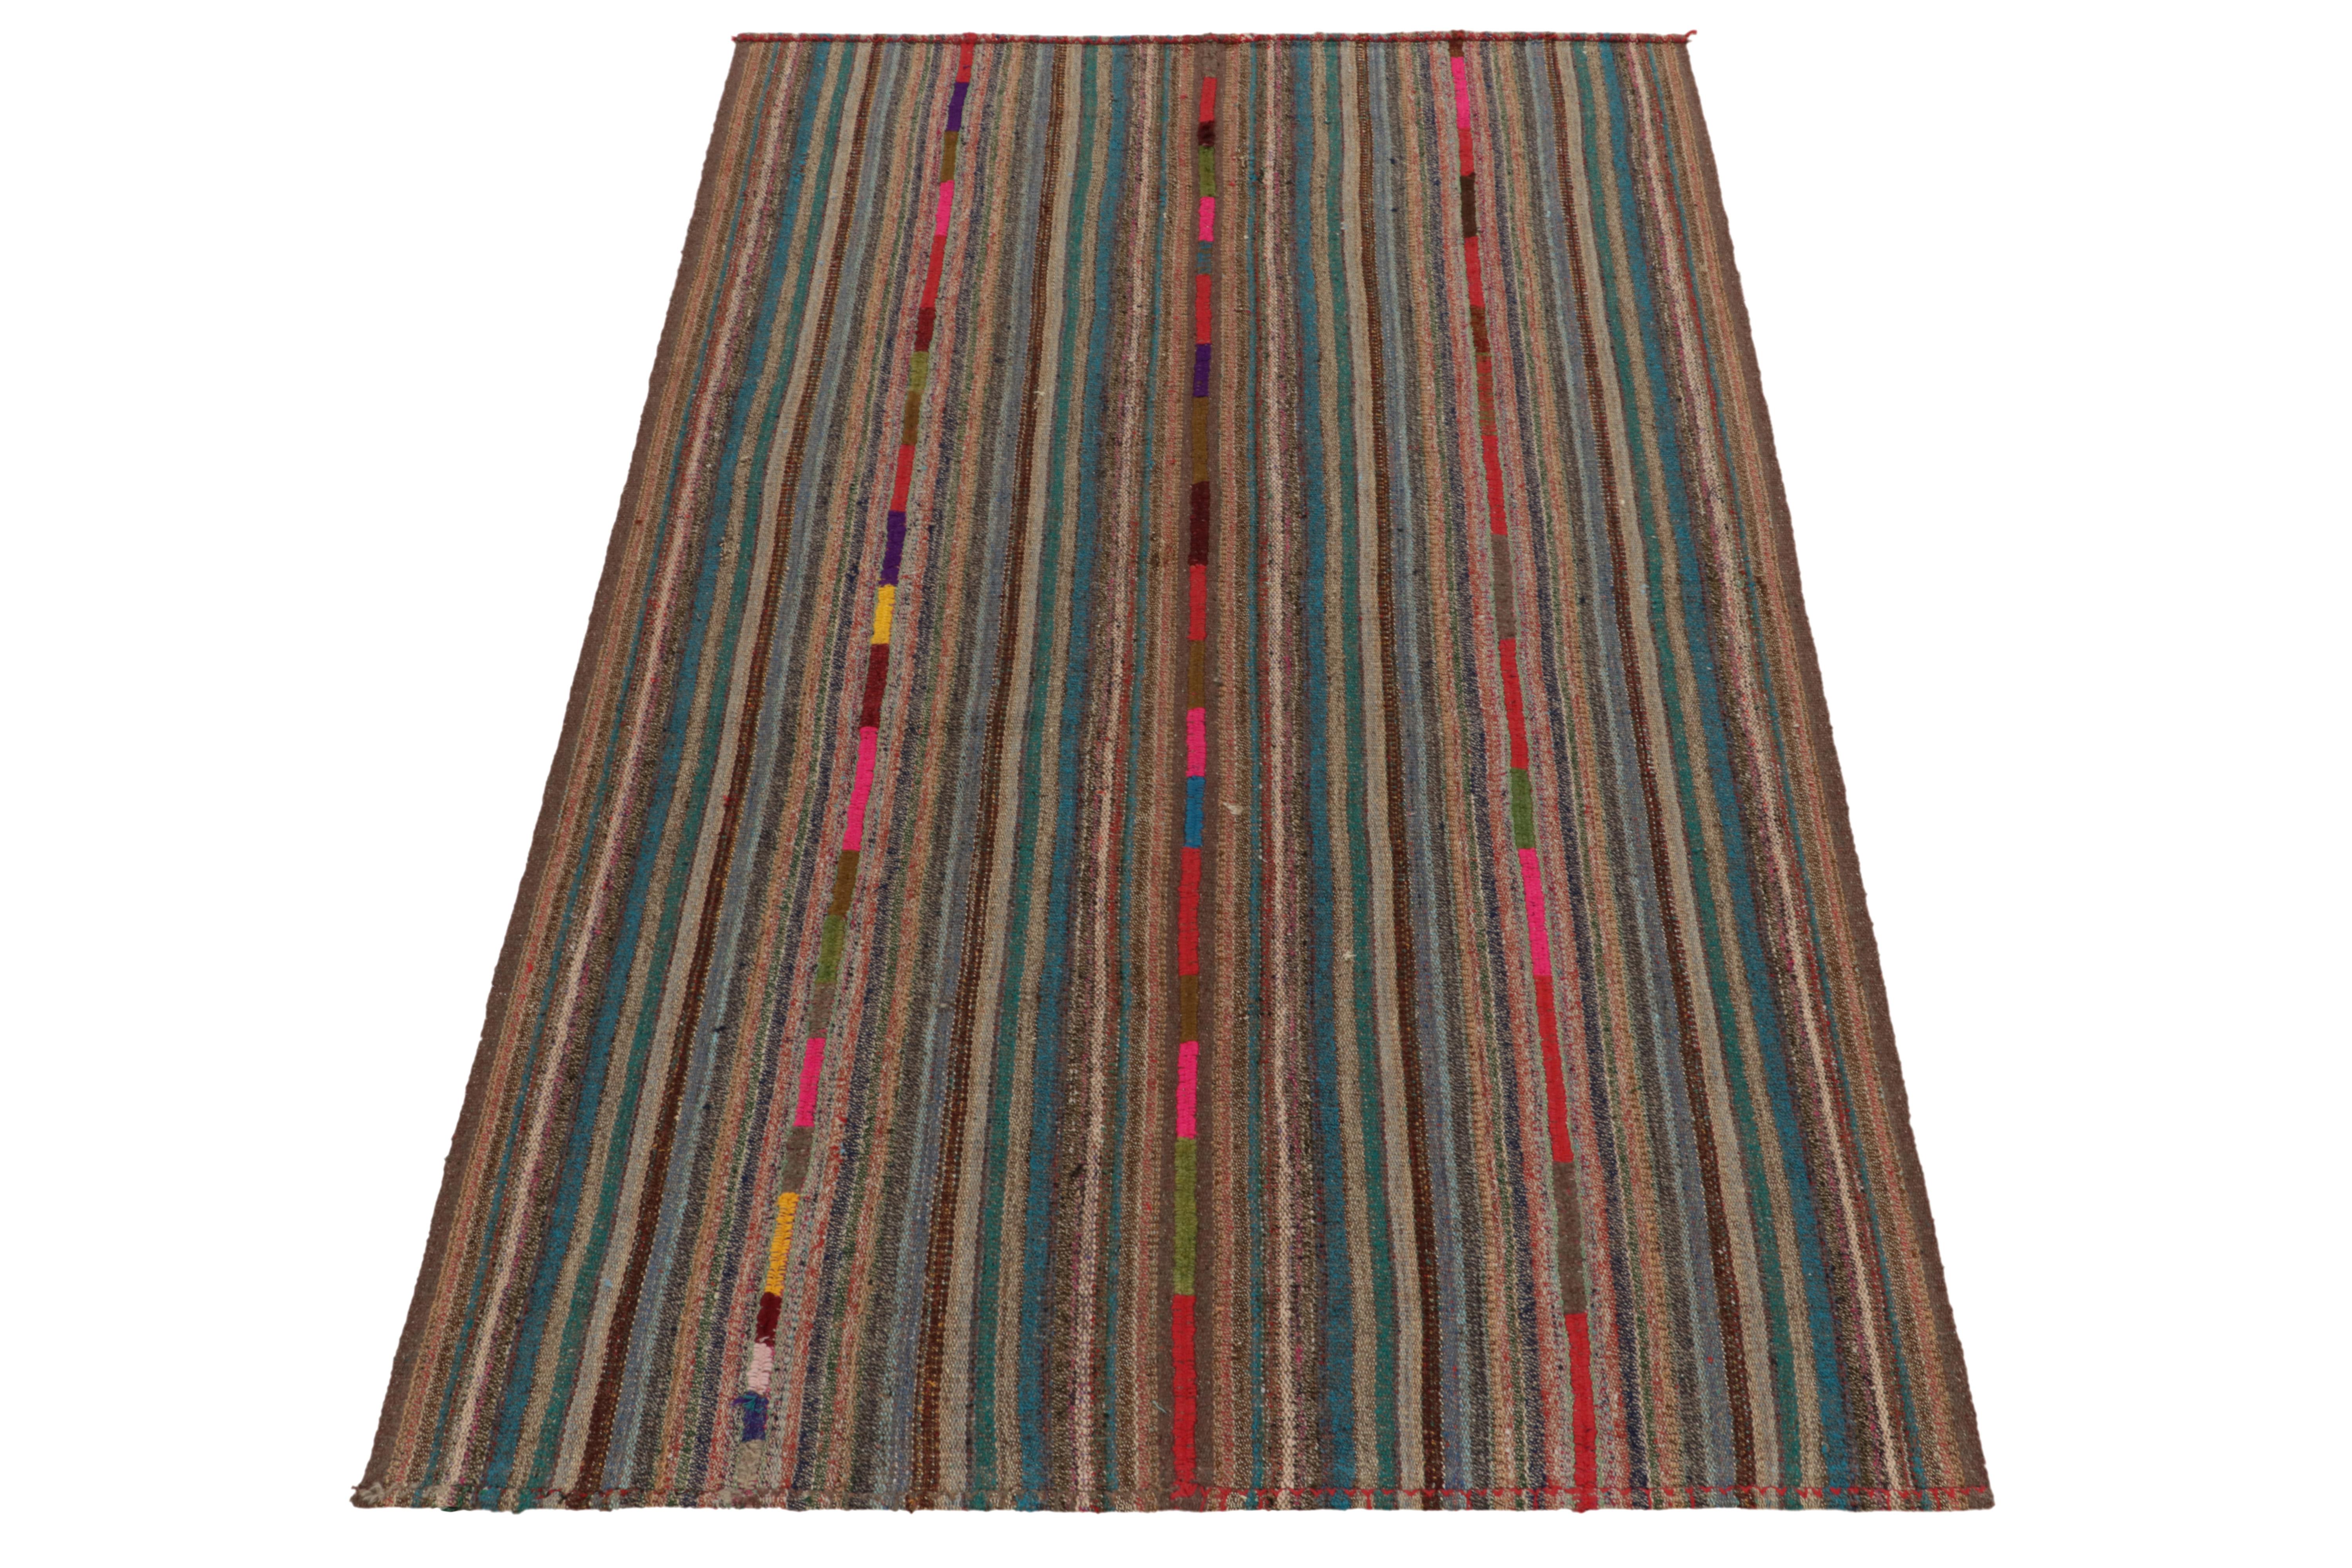 Originating from Turkey circa 1950-1960, a rare type of chaput kilim rug style now entering our Antique & Vintage selections. Characterized by fine detailing with the colors within the polychromatic stripes, the playful piece marks a whimsical